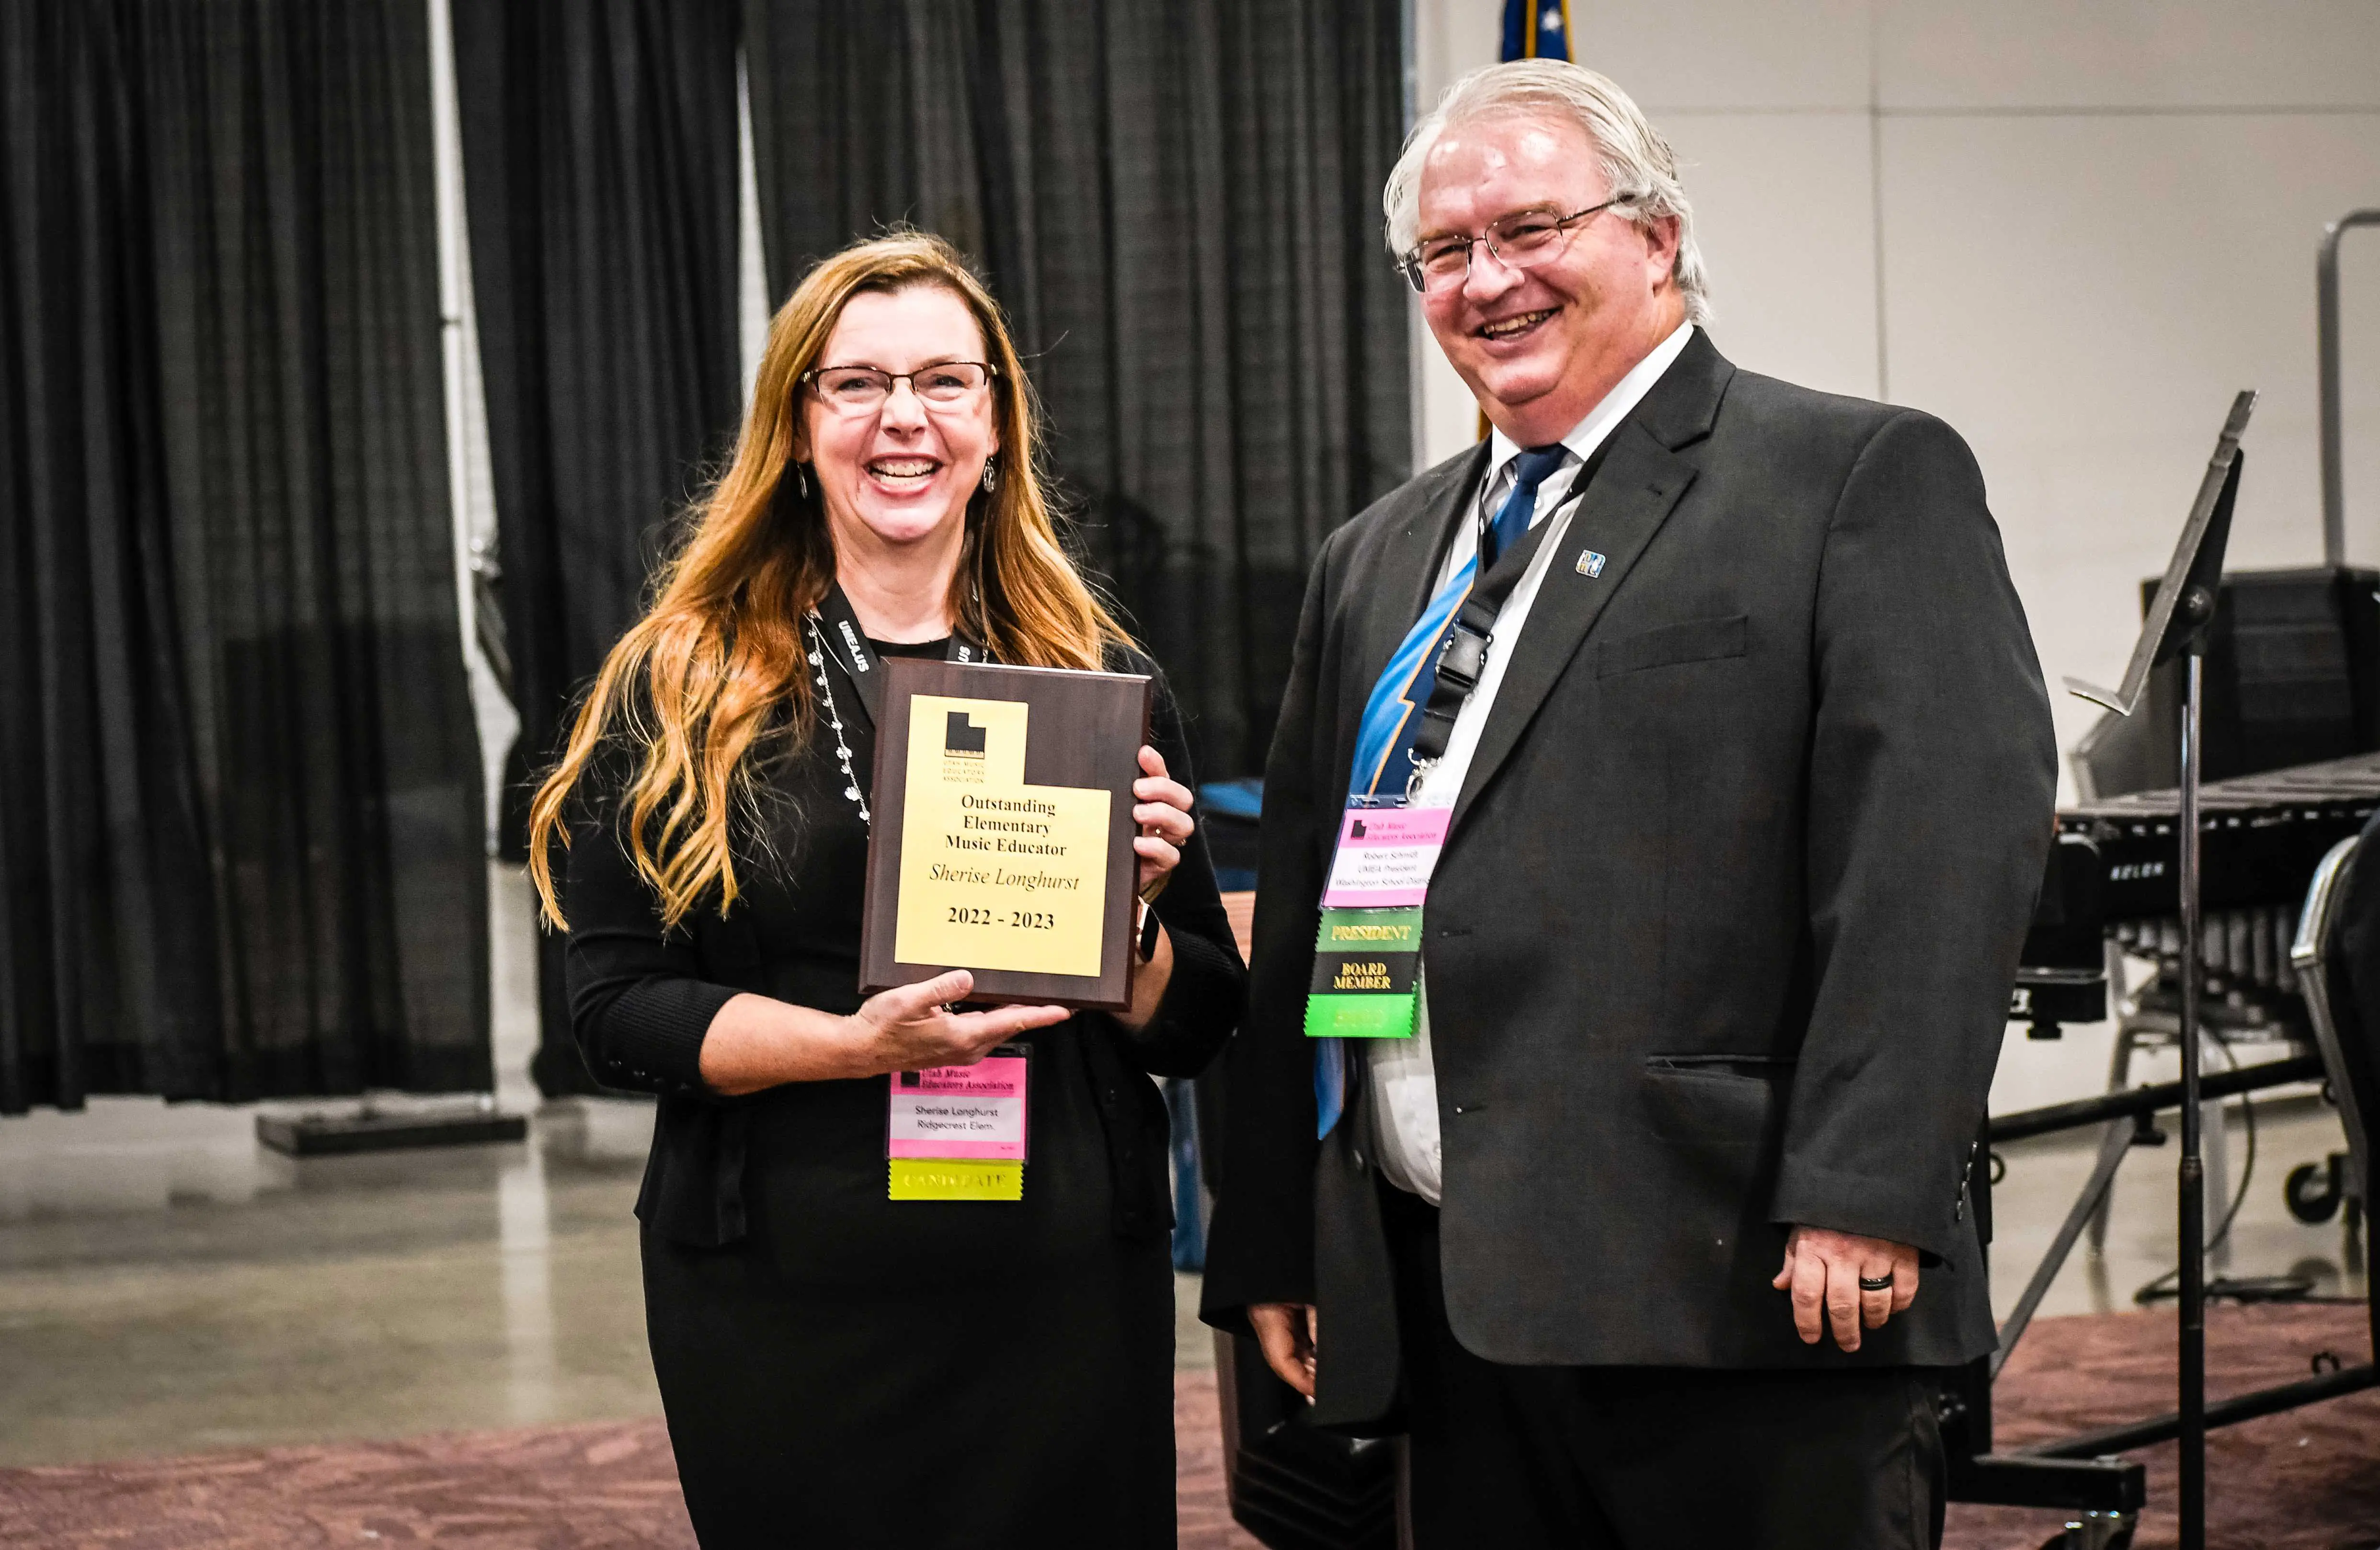 Sherise Longhurst receiving Outstanding Elementary Music Educator of the Year for the 2022-2023 school year by the Utah Music Education Association